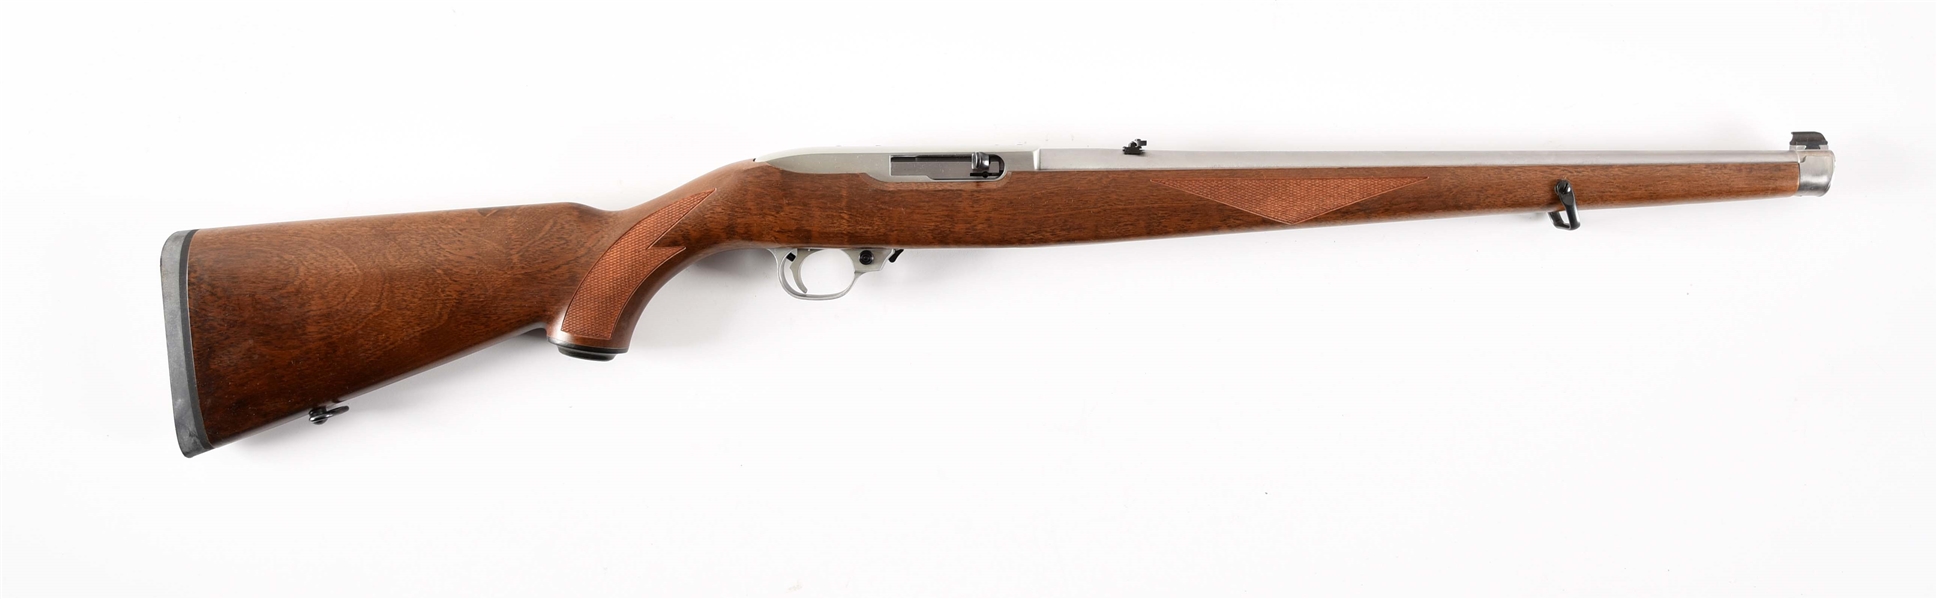 (M) RUGER MODEL 10/22 MANNLICHER SEMI-AUTOMATIC RIFLE